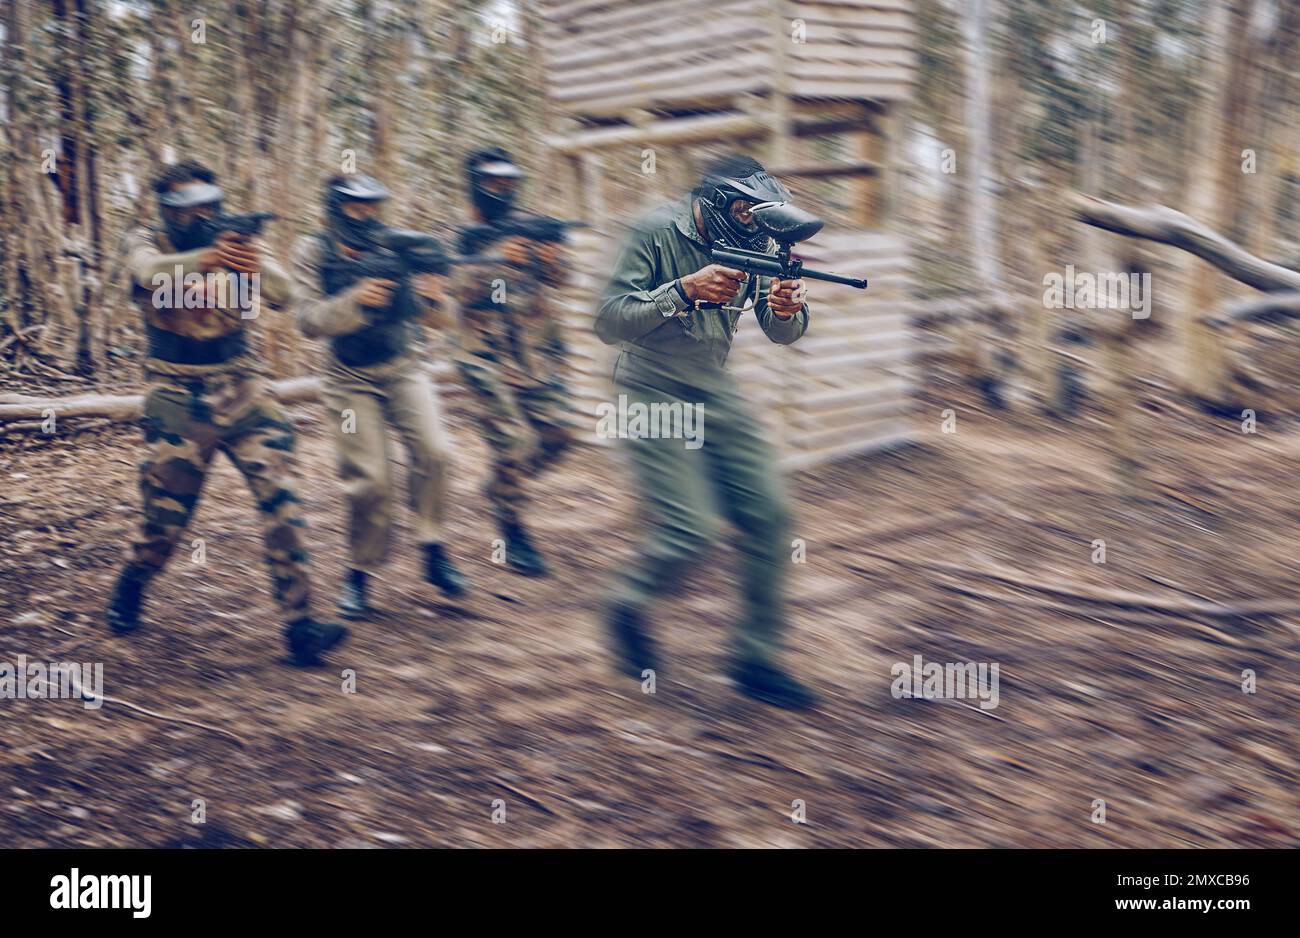 Paintball, team work or men running in a shooting game with speed or fast action on a fun battlefield